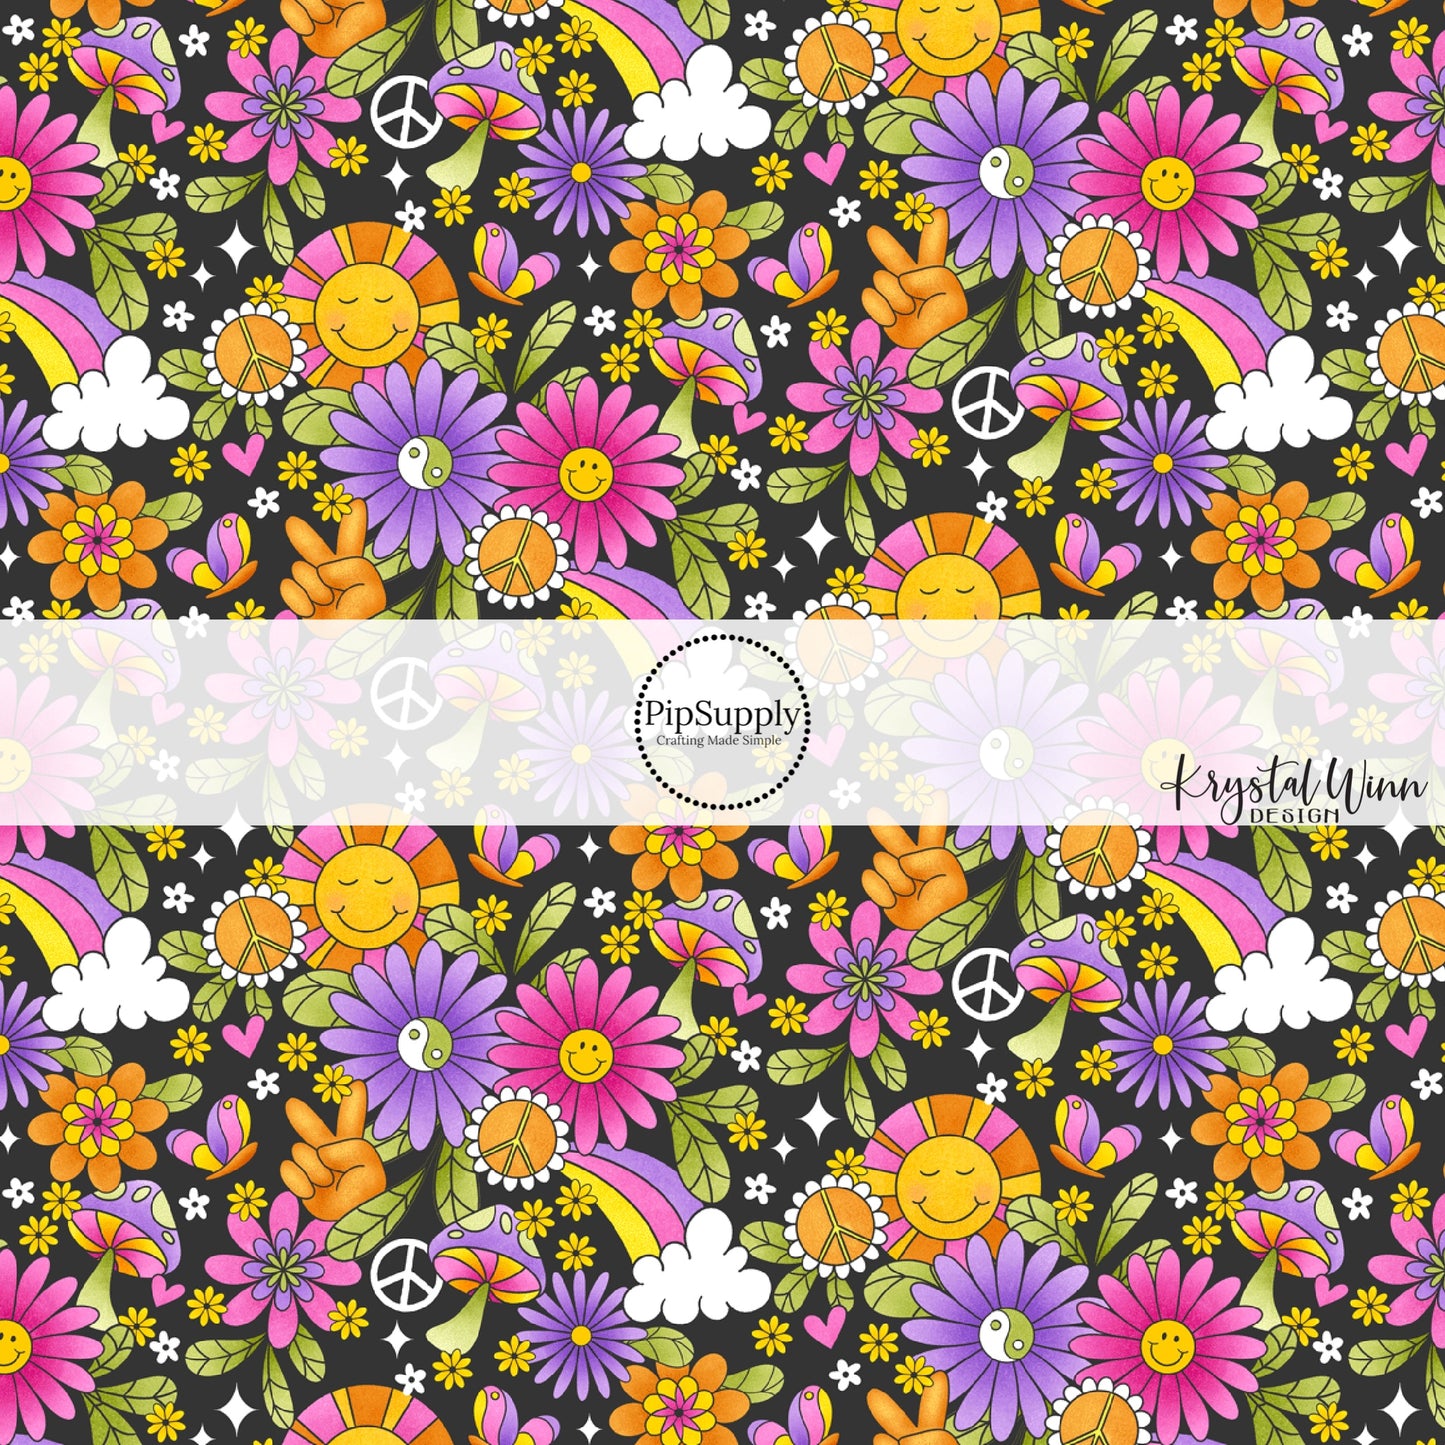 Peace, Floral, and Shrooms Fabric By The Yard - Too Groovy Black